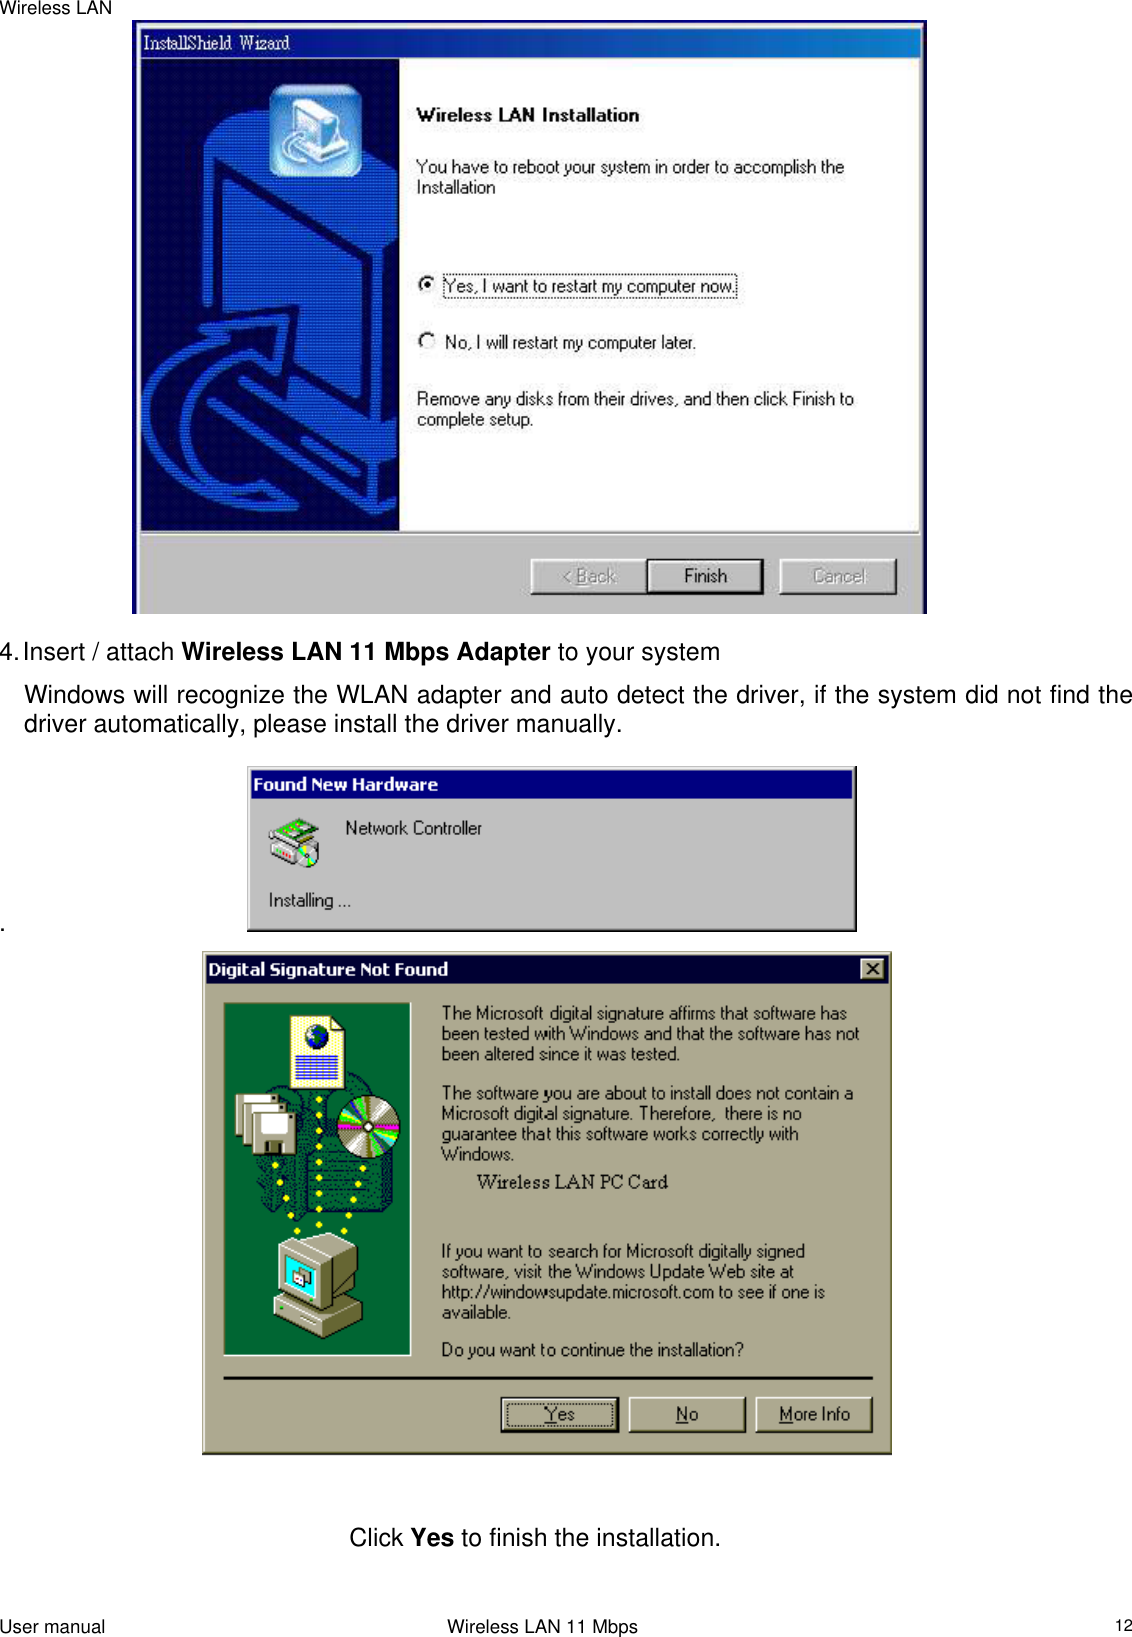 Wireless LAN     4. Insert / attach Wireless LAN 11 Mbps Adapter to your system Windows will recognize the WLAN adapter and auto detect the driver, if the system did not find the driver automatically, please install the driver manually.  .                                                                                                                             Click Yes to finish the installation.   User manual                                                                 Wireless LAN 11 Mbps   12 